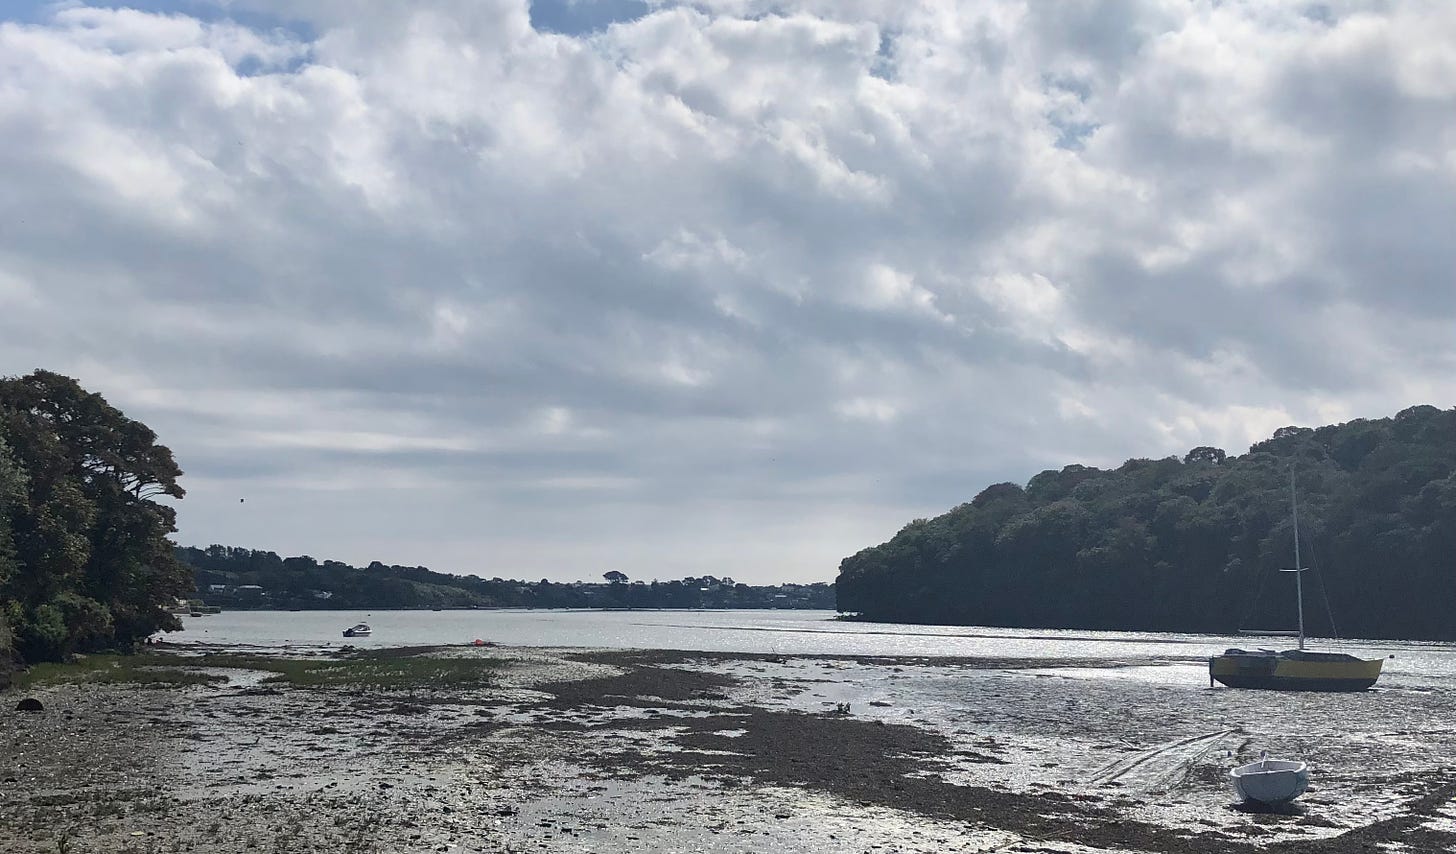 Restronguet Creek at low tide. A small rowing boat and a slightly larger sailing boat are stranded on the mud. And somewhere in the sky is the very faintest blob of an osprey flying away.